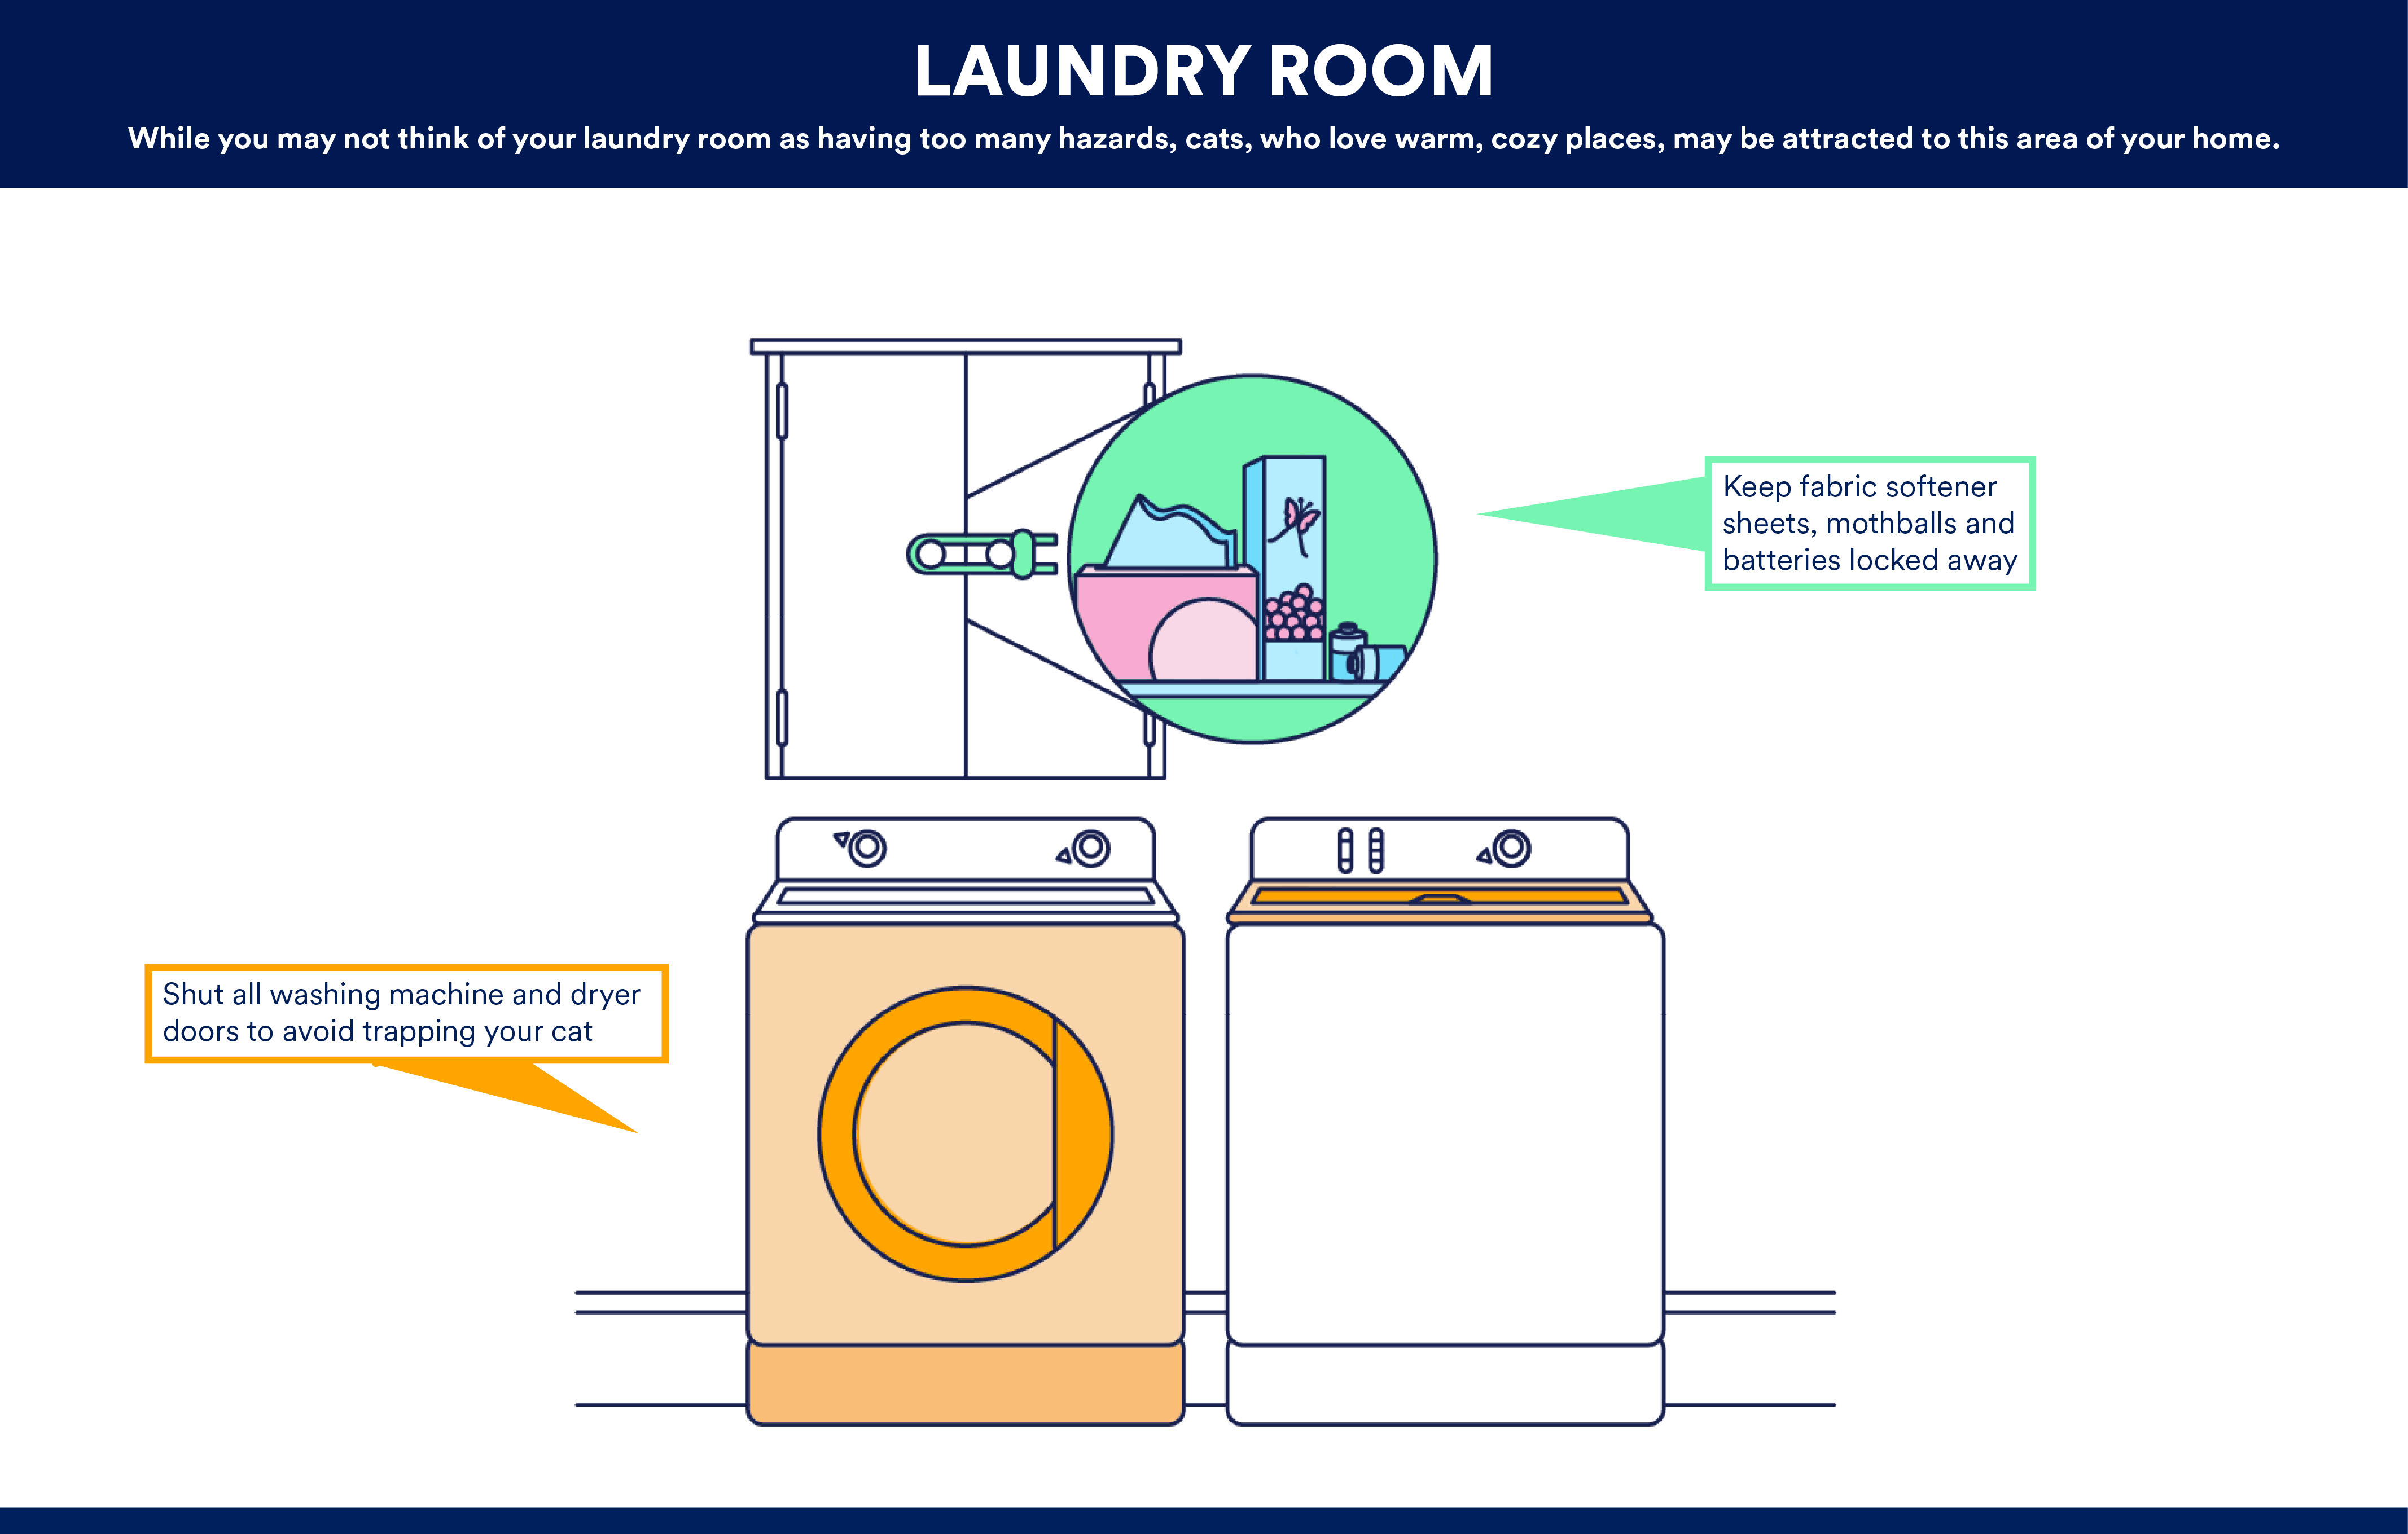 Cat Proofing Laundry Room Graphic